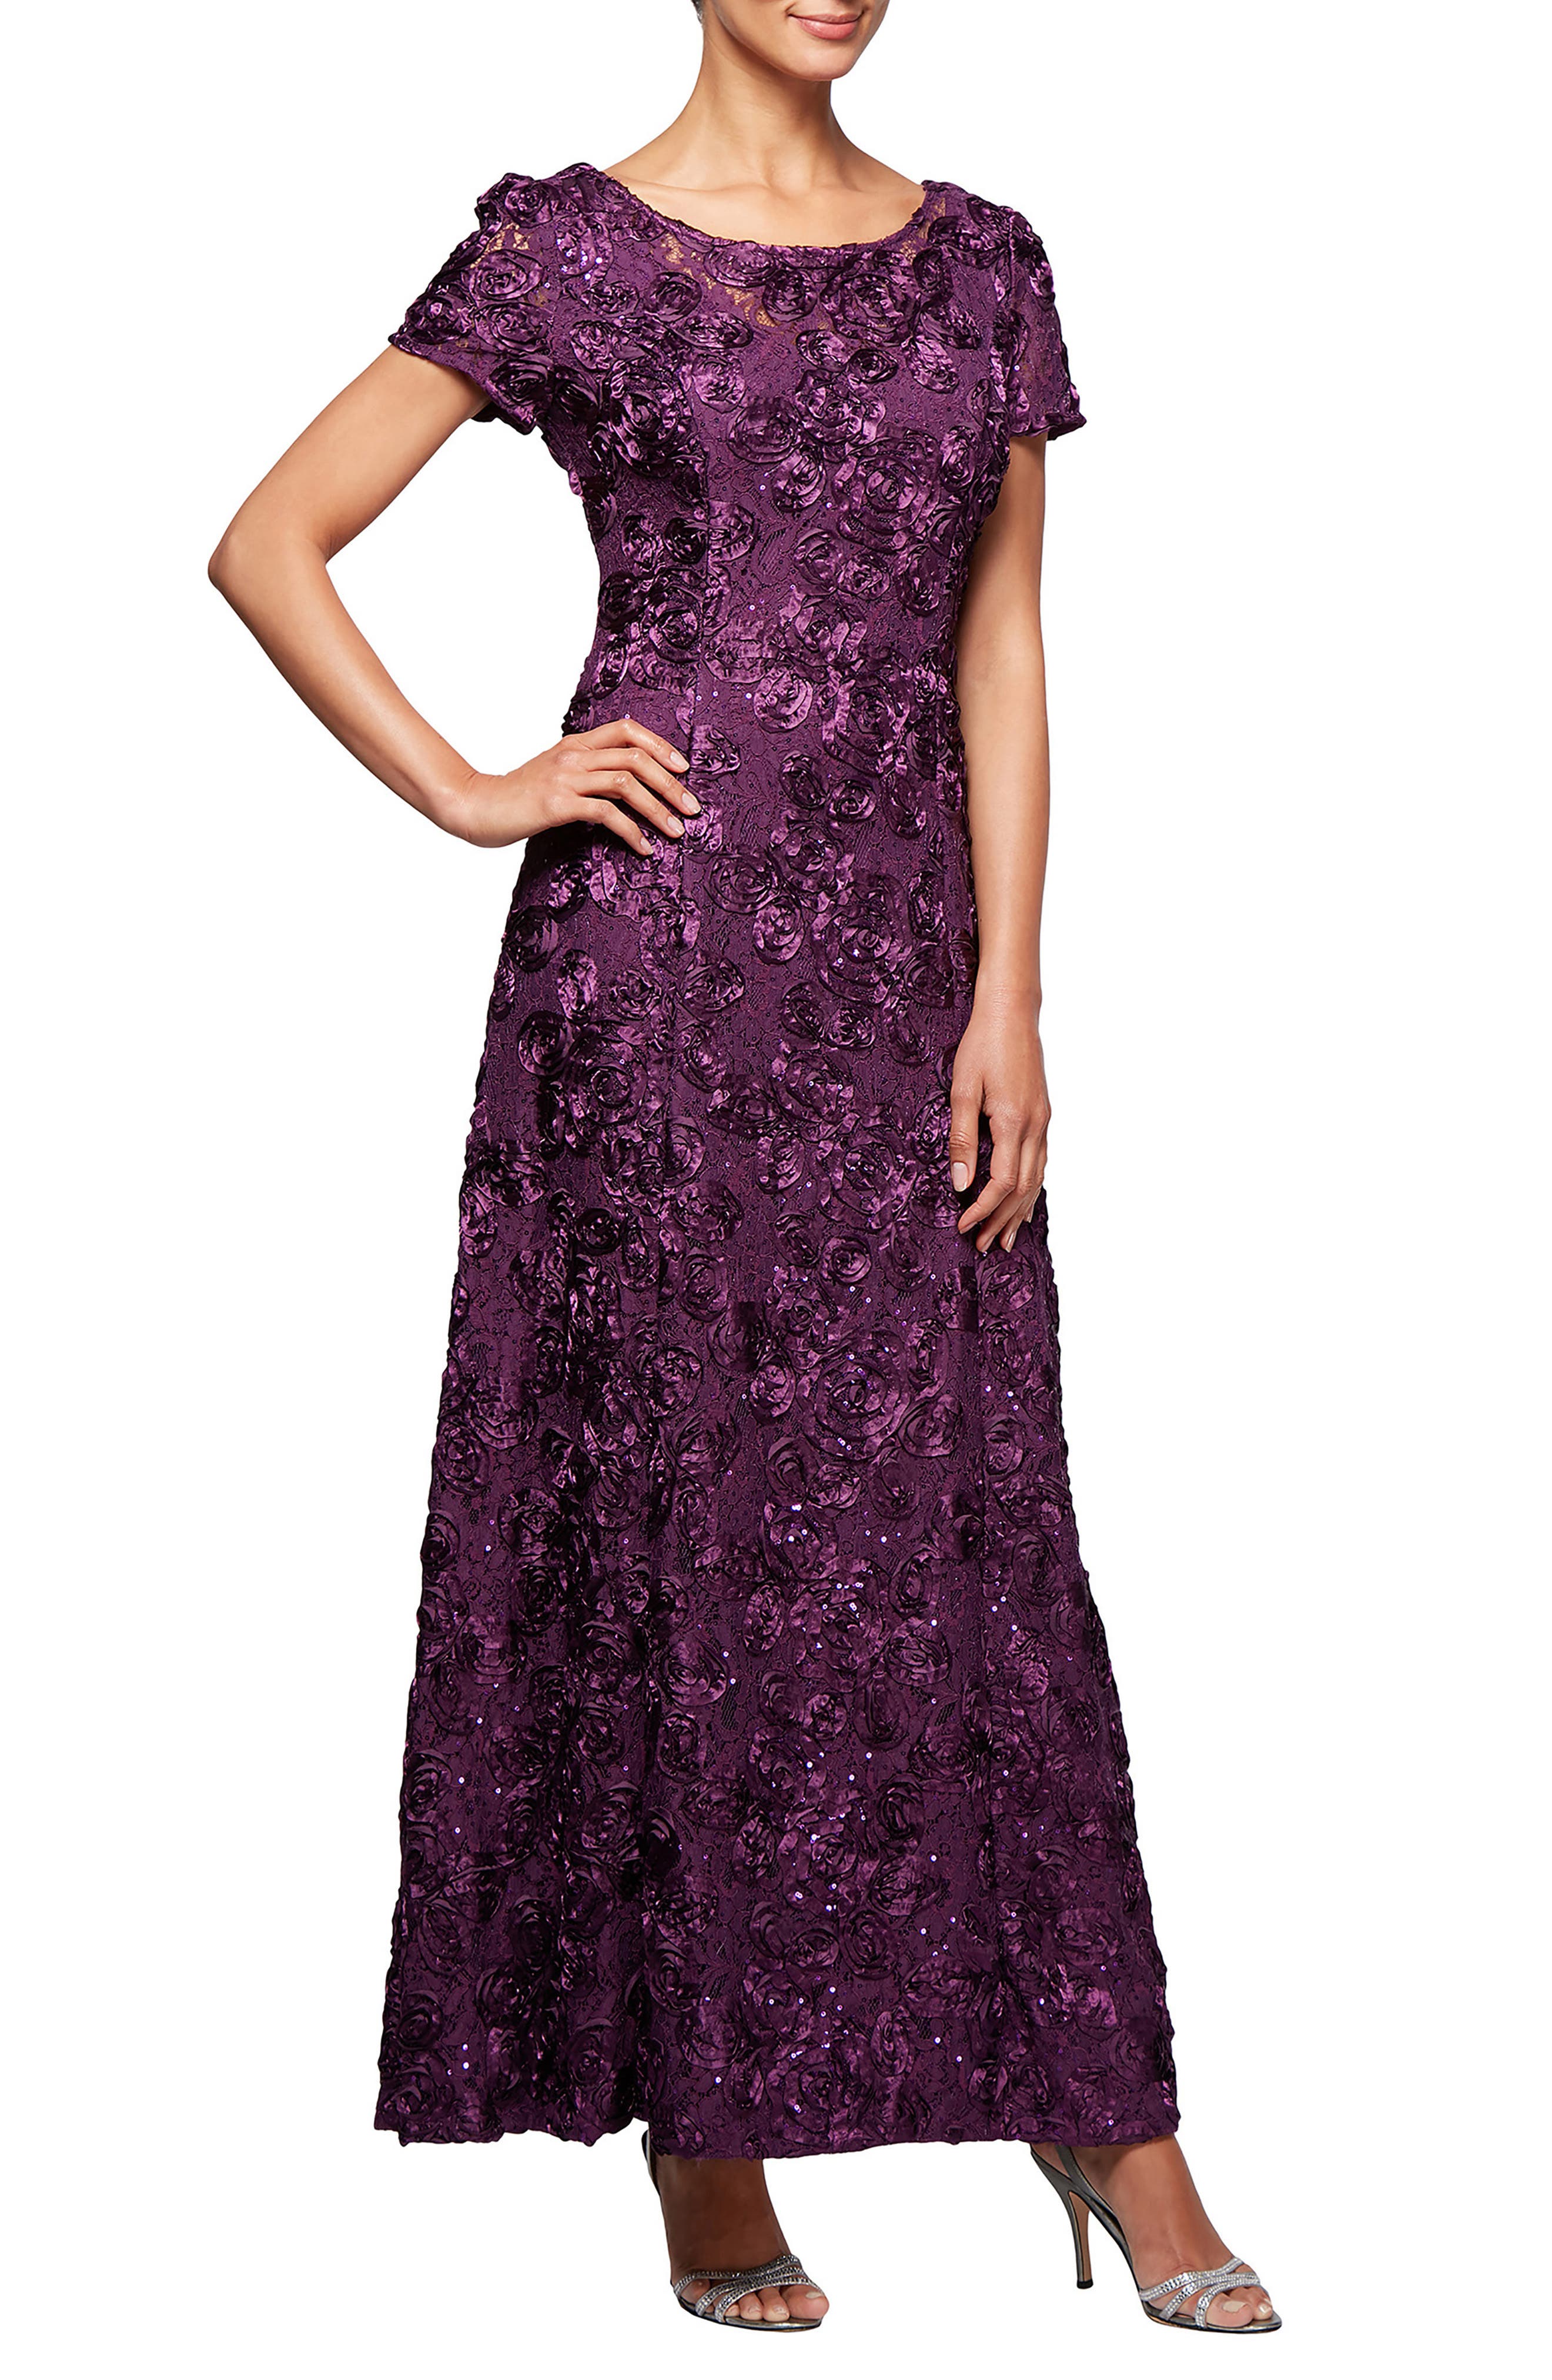 Purple Formal Dresses ☀ Evening Gowns ...